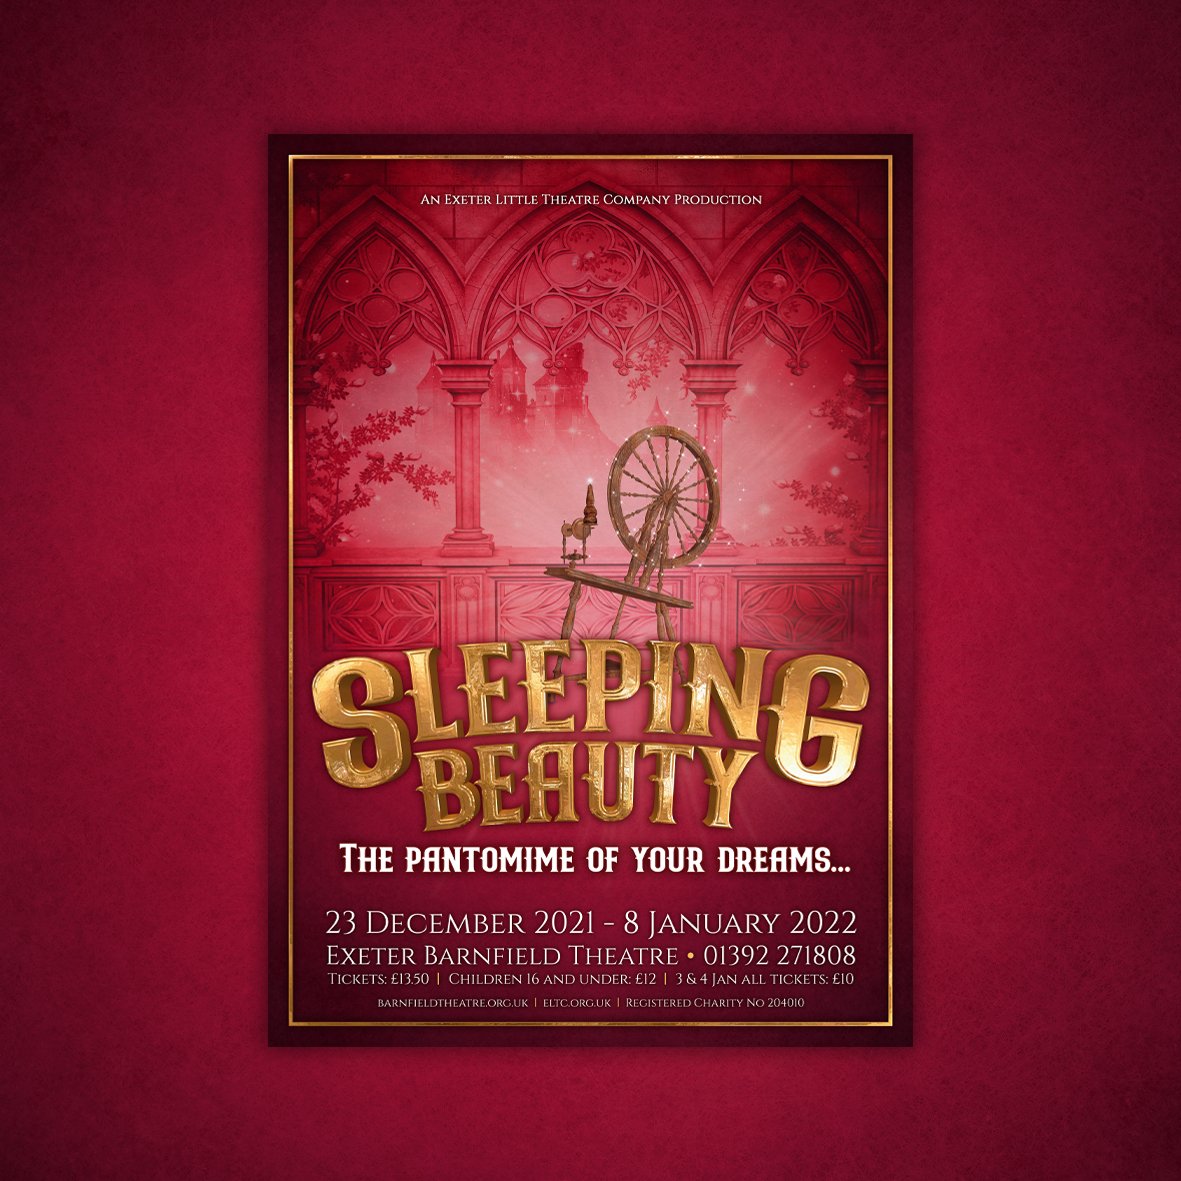 Sleeping Beauty | Eye-catching Posters and Merchandise Designed by Hot Rock Group